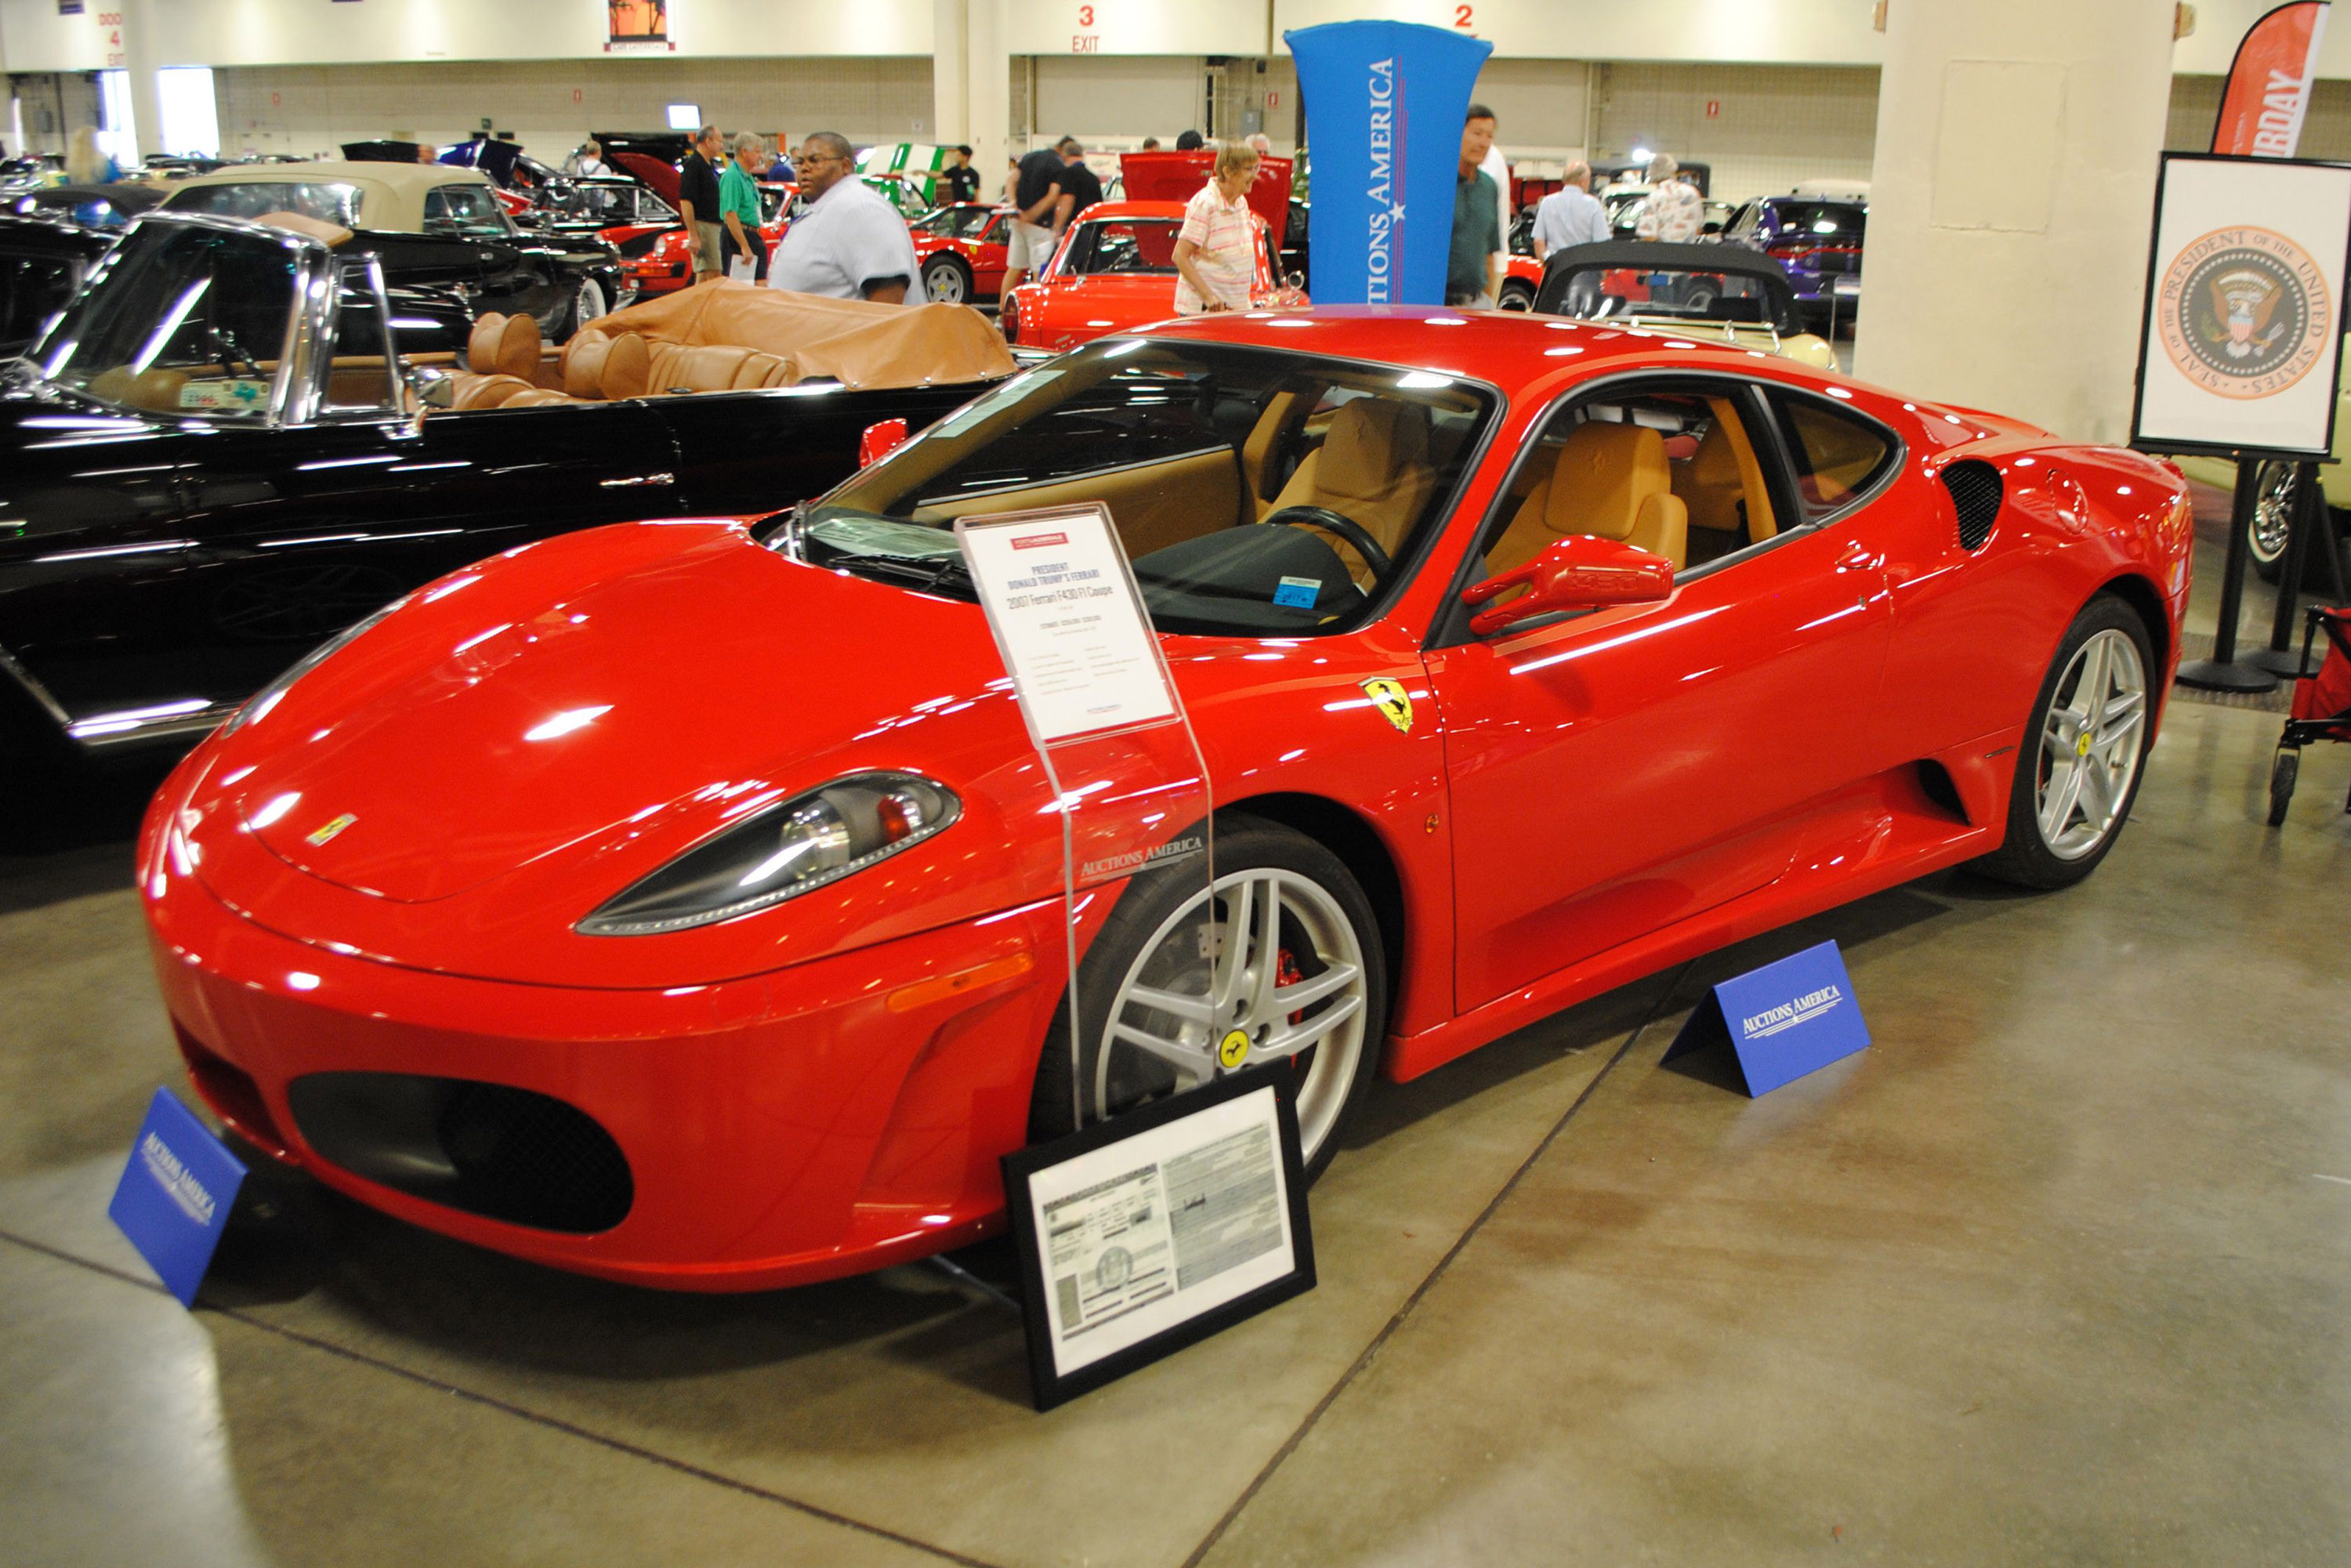 Trump's red Ferrari sells for disappointing $270,000